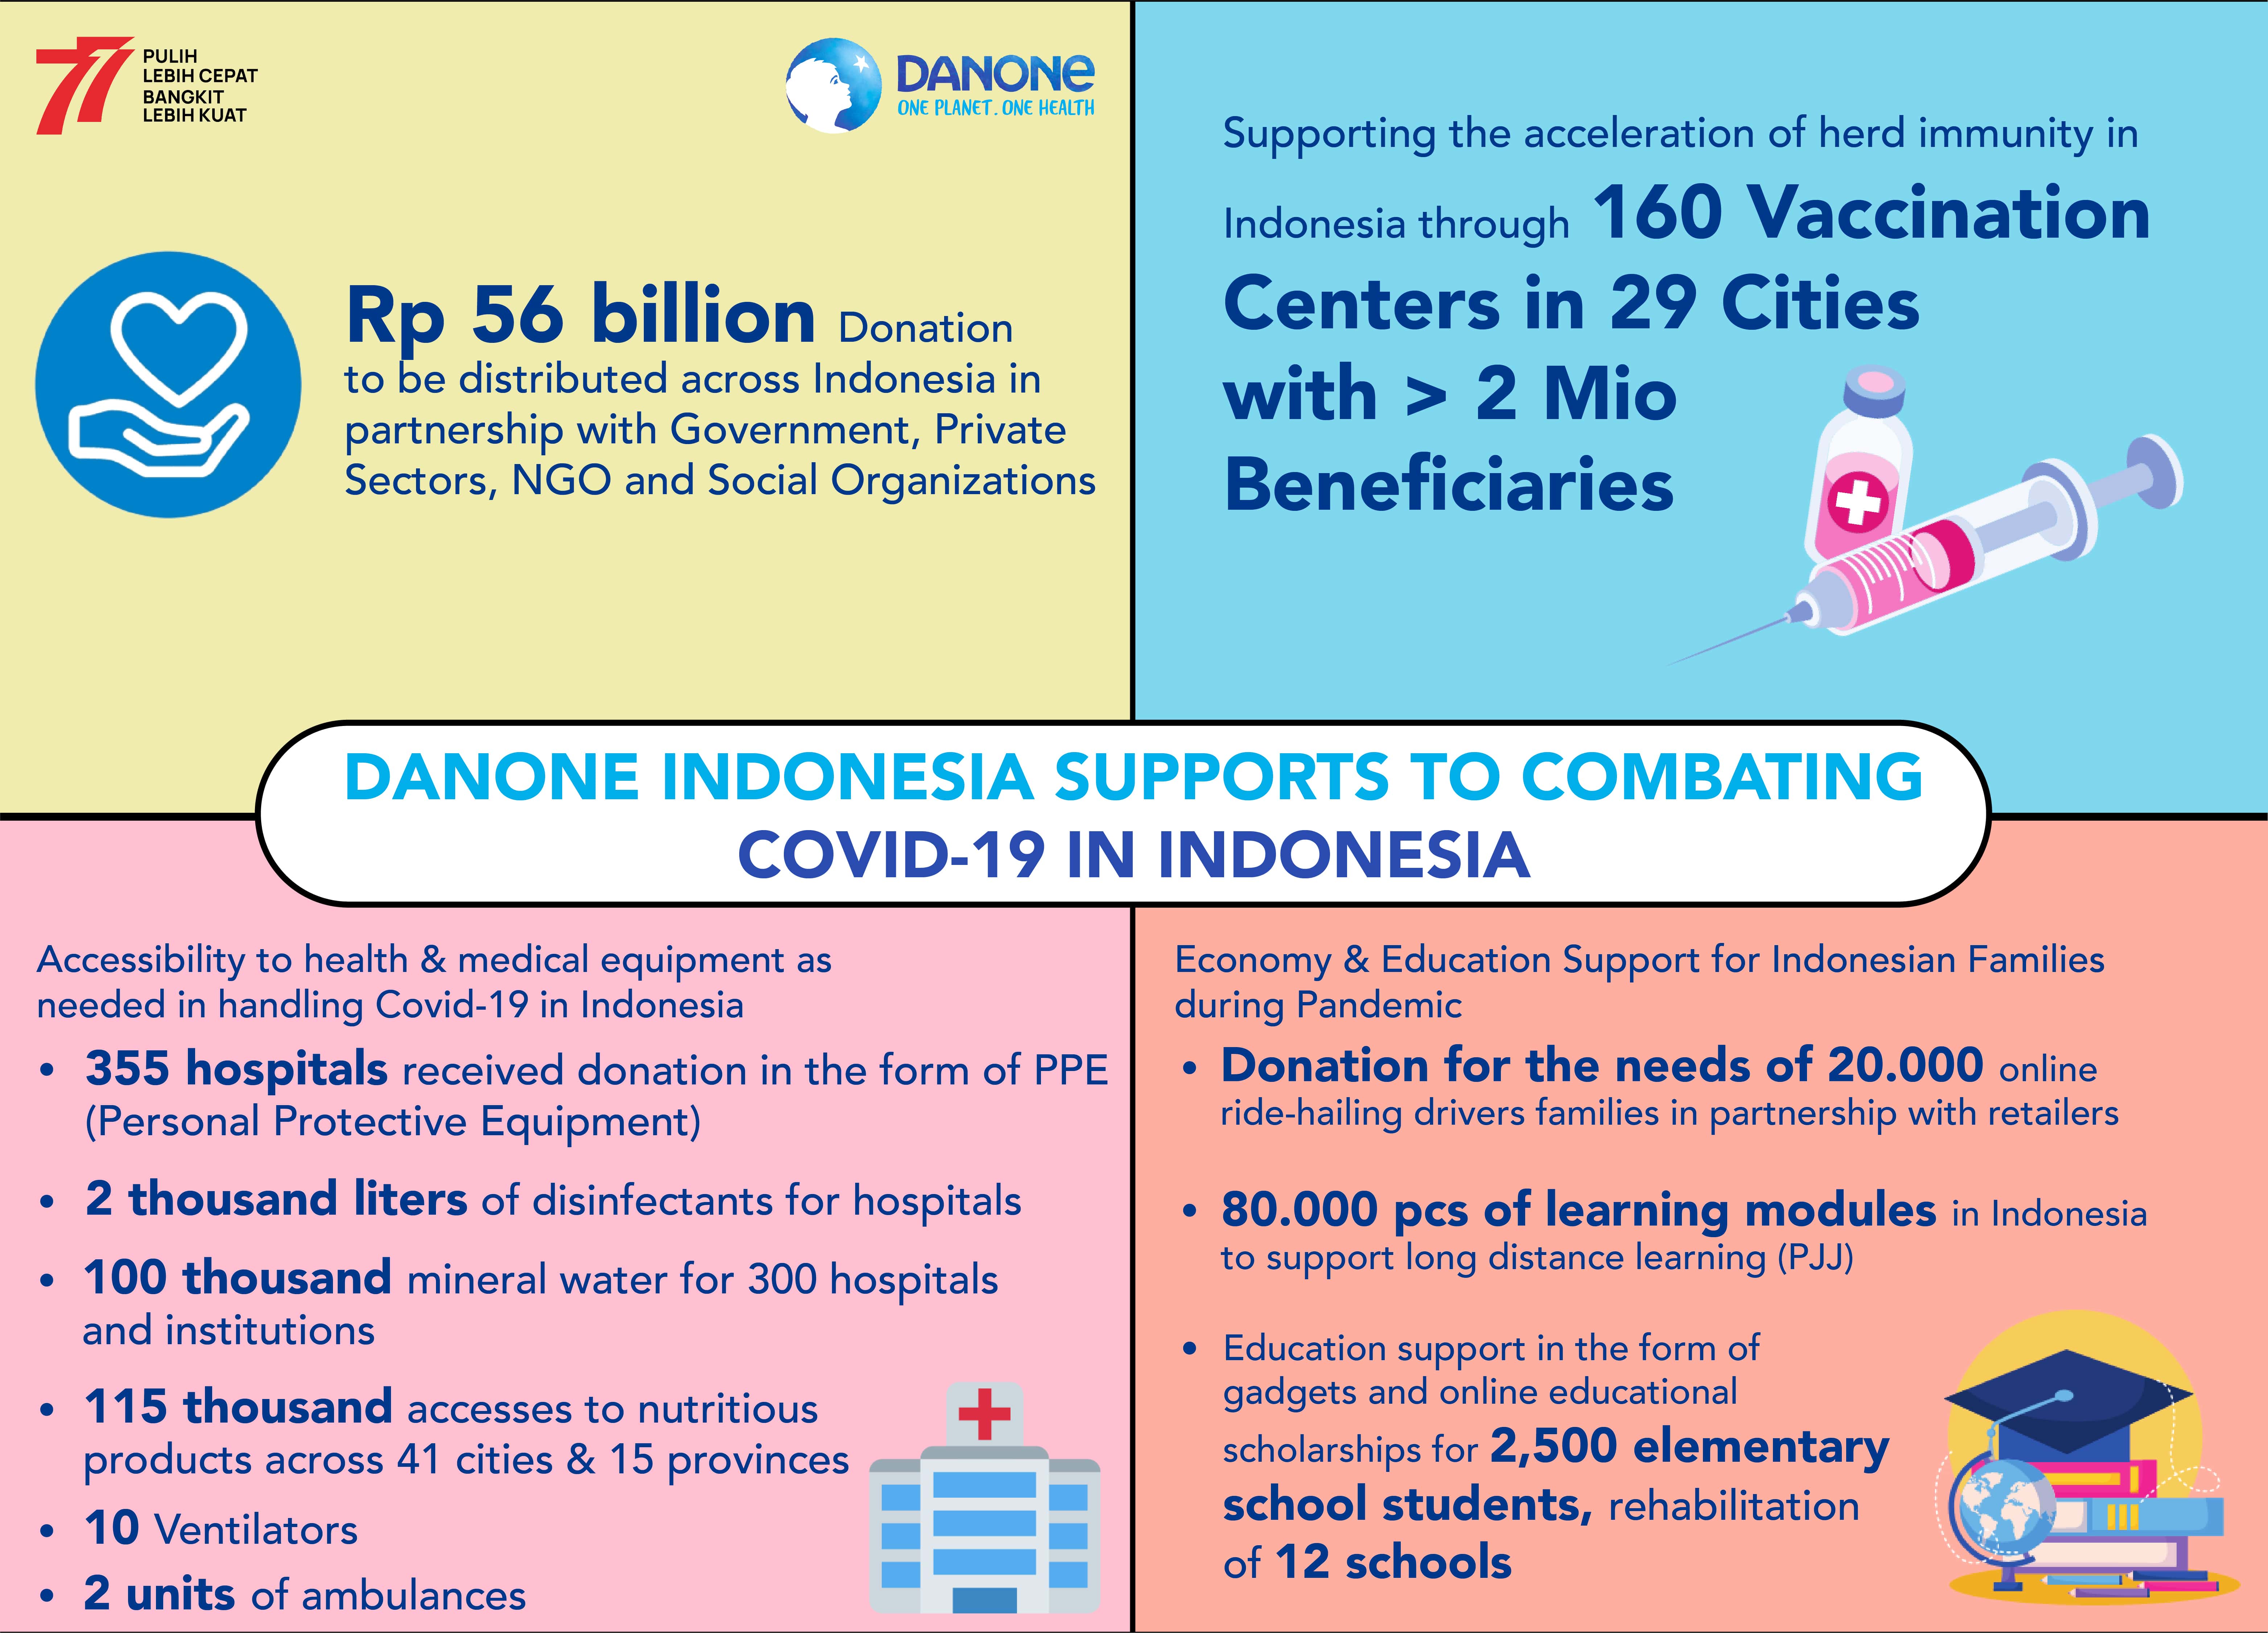 Danone Indonesia Supports To Combating Covid-19 in Indonesia